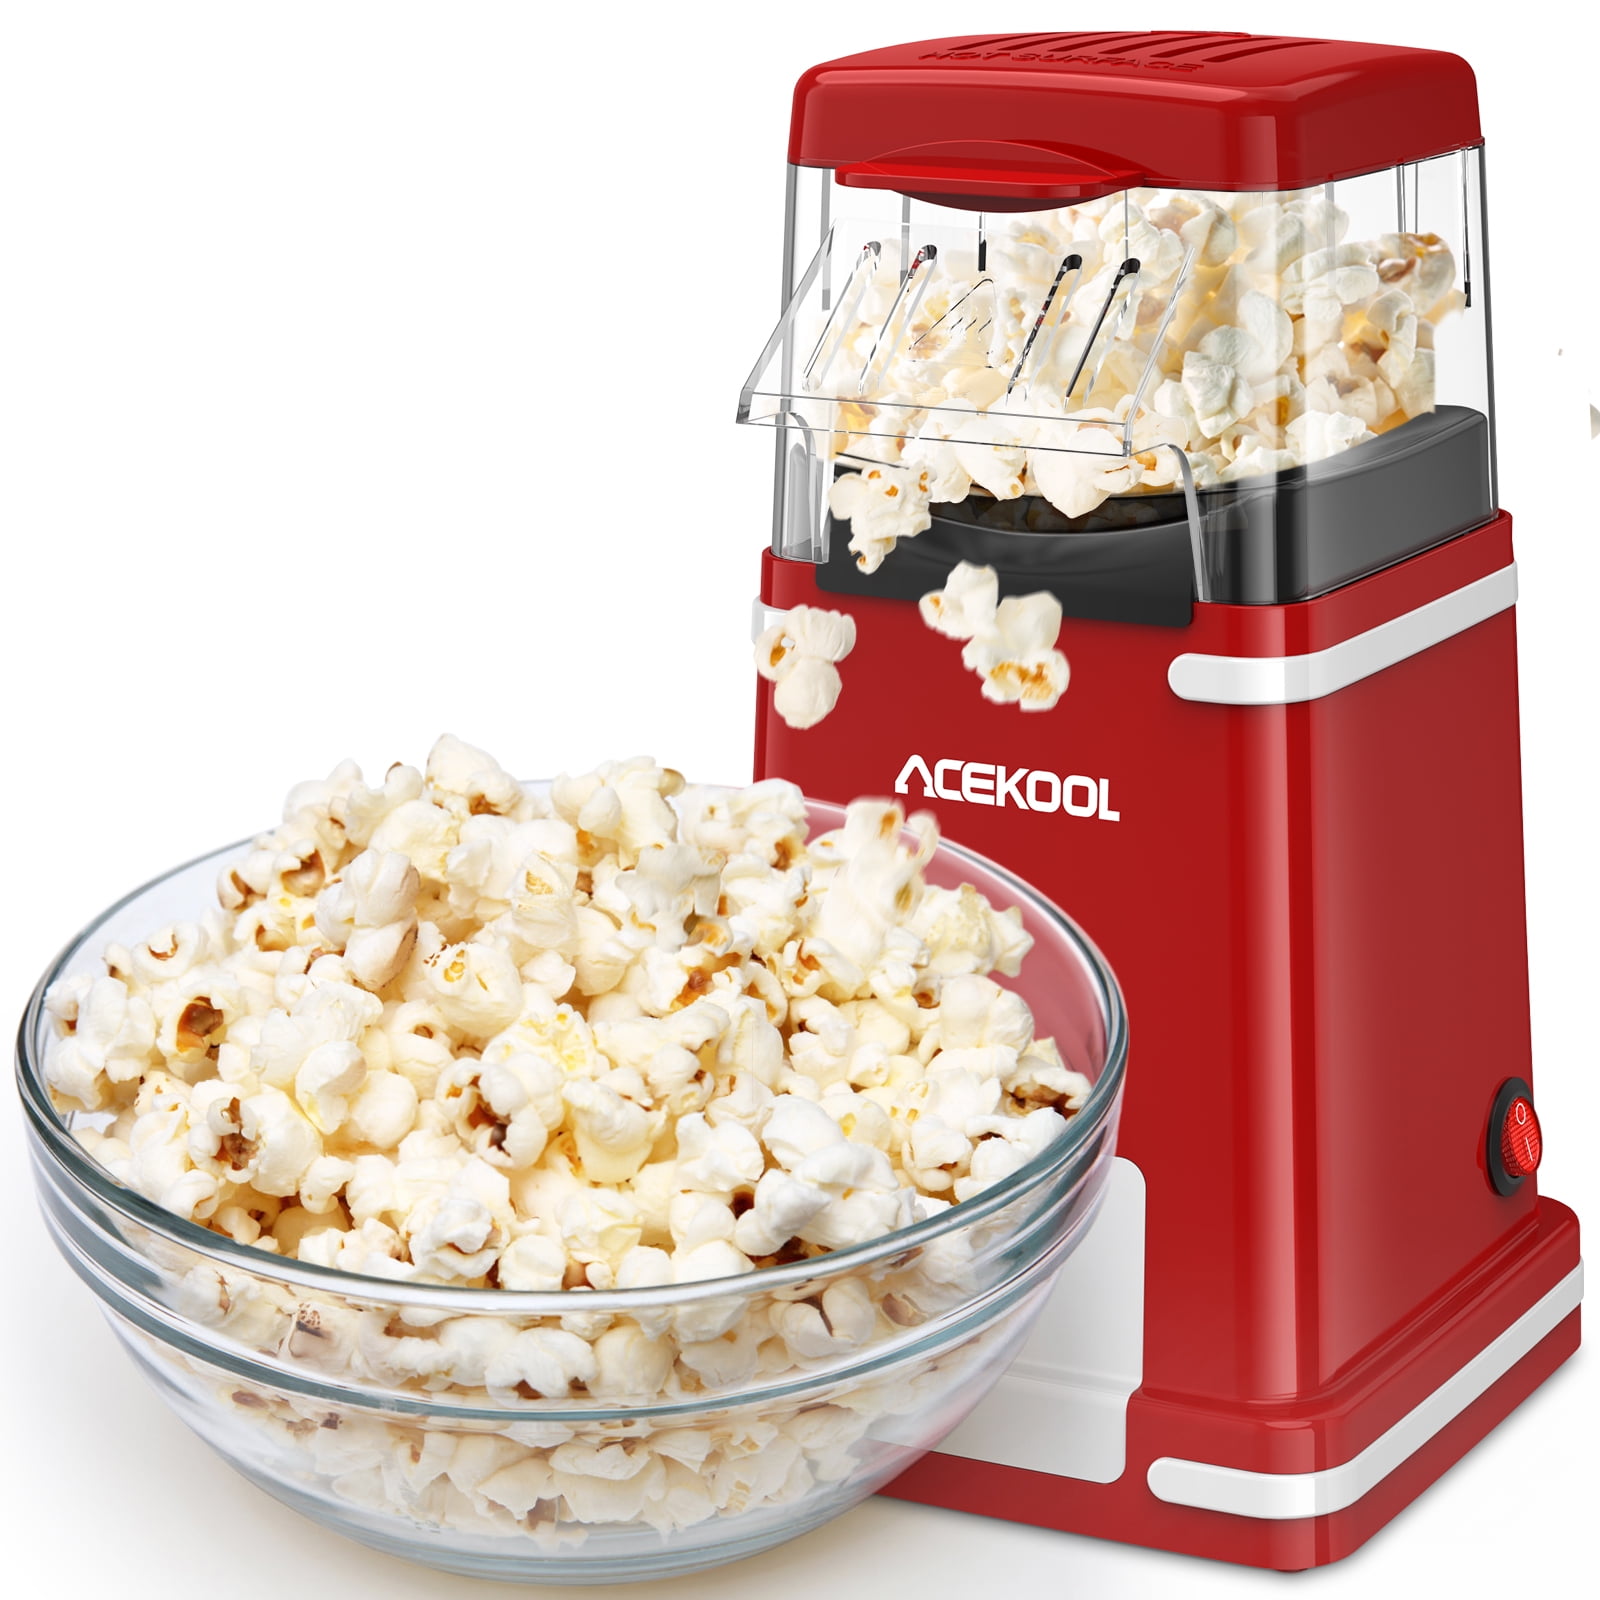 Popcorn Machine, High Pop Rate Hot Air Popcorn Maker with Measuring Cup ETL Certified, 2 Minutes Fast Making Popcorn Popper, BPA Free, No Oil Mini